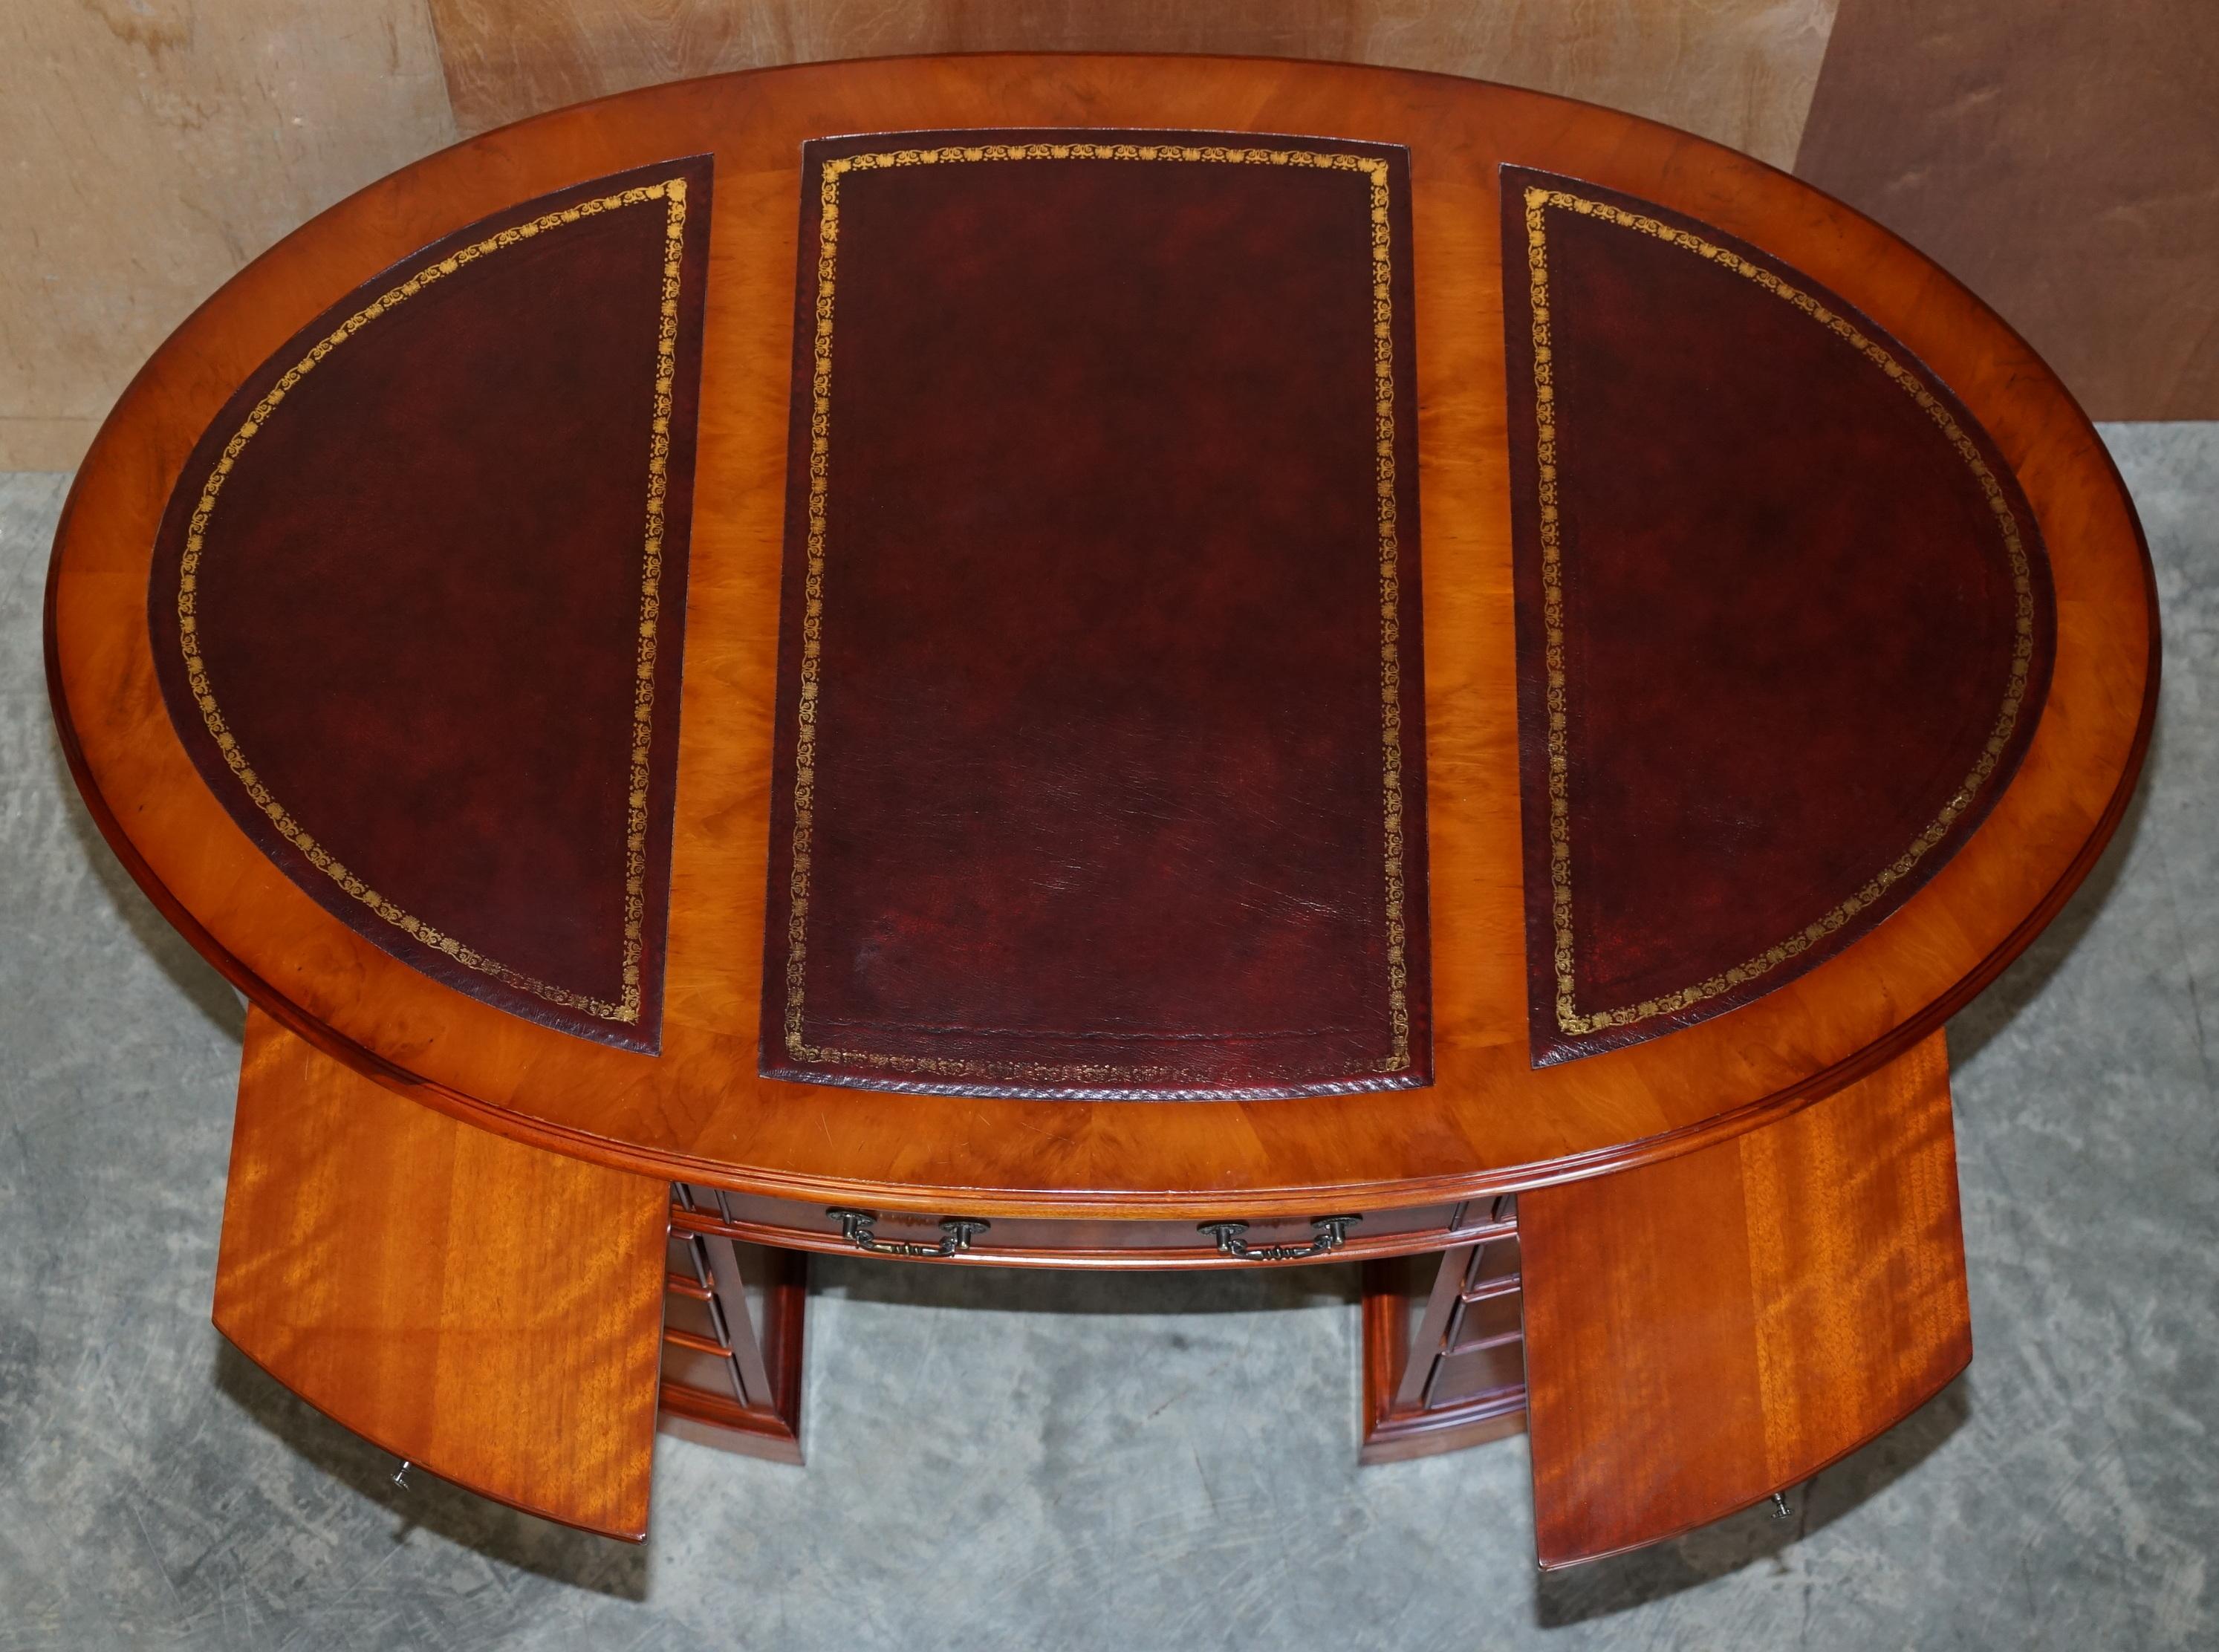 20th Century Burr Yew Wood Oval Pedestal Partners Desk Oxblood Leather Top Butlers Trays